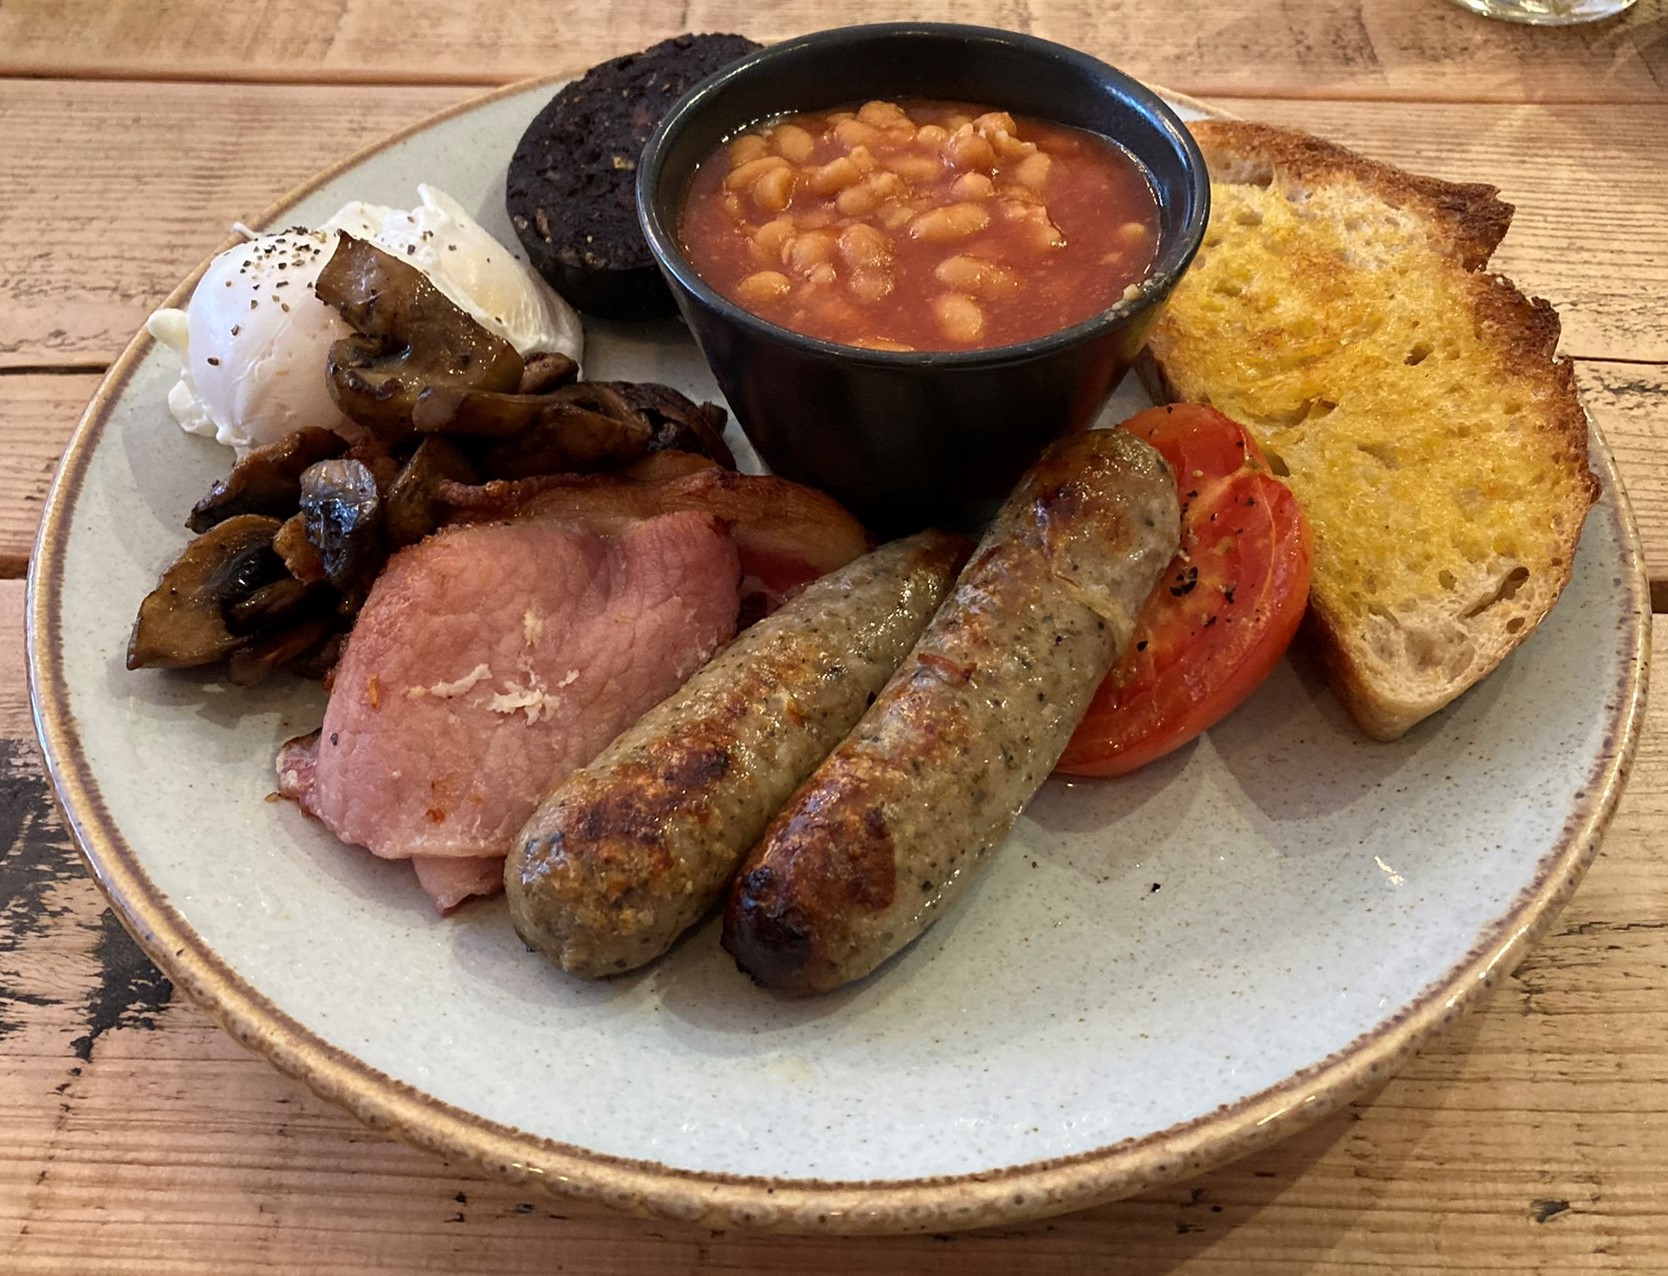 A classic full English at The Wandering Duck